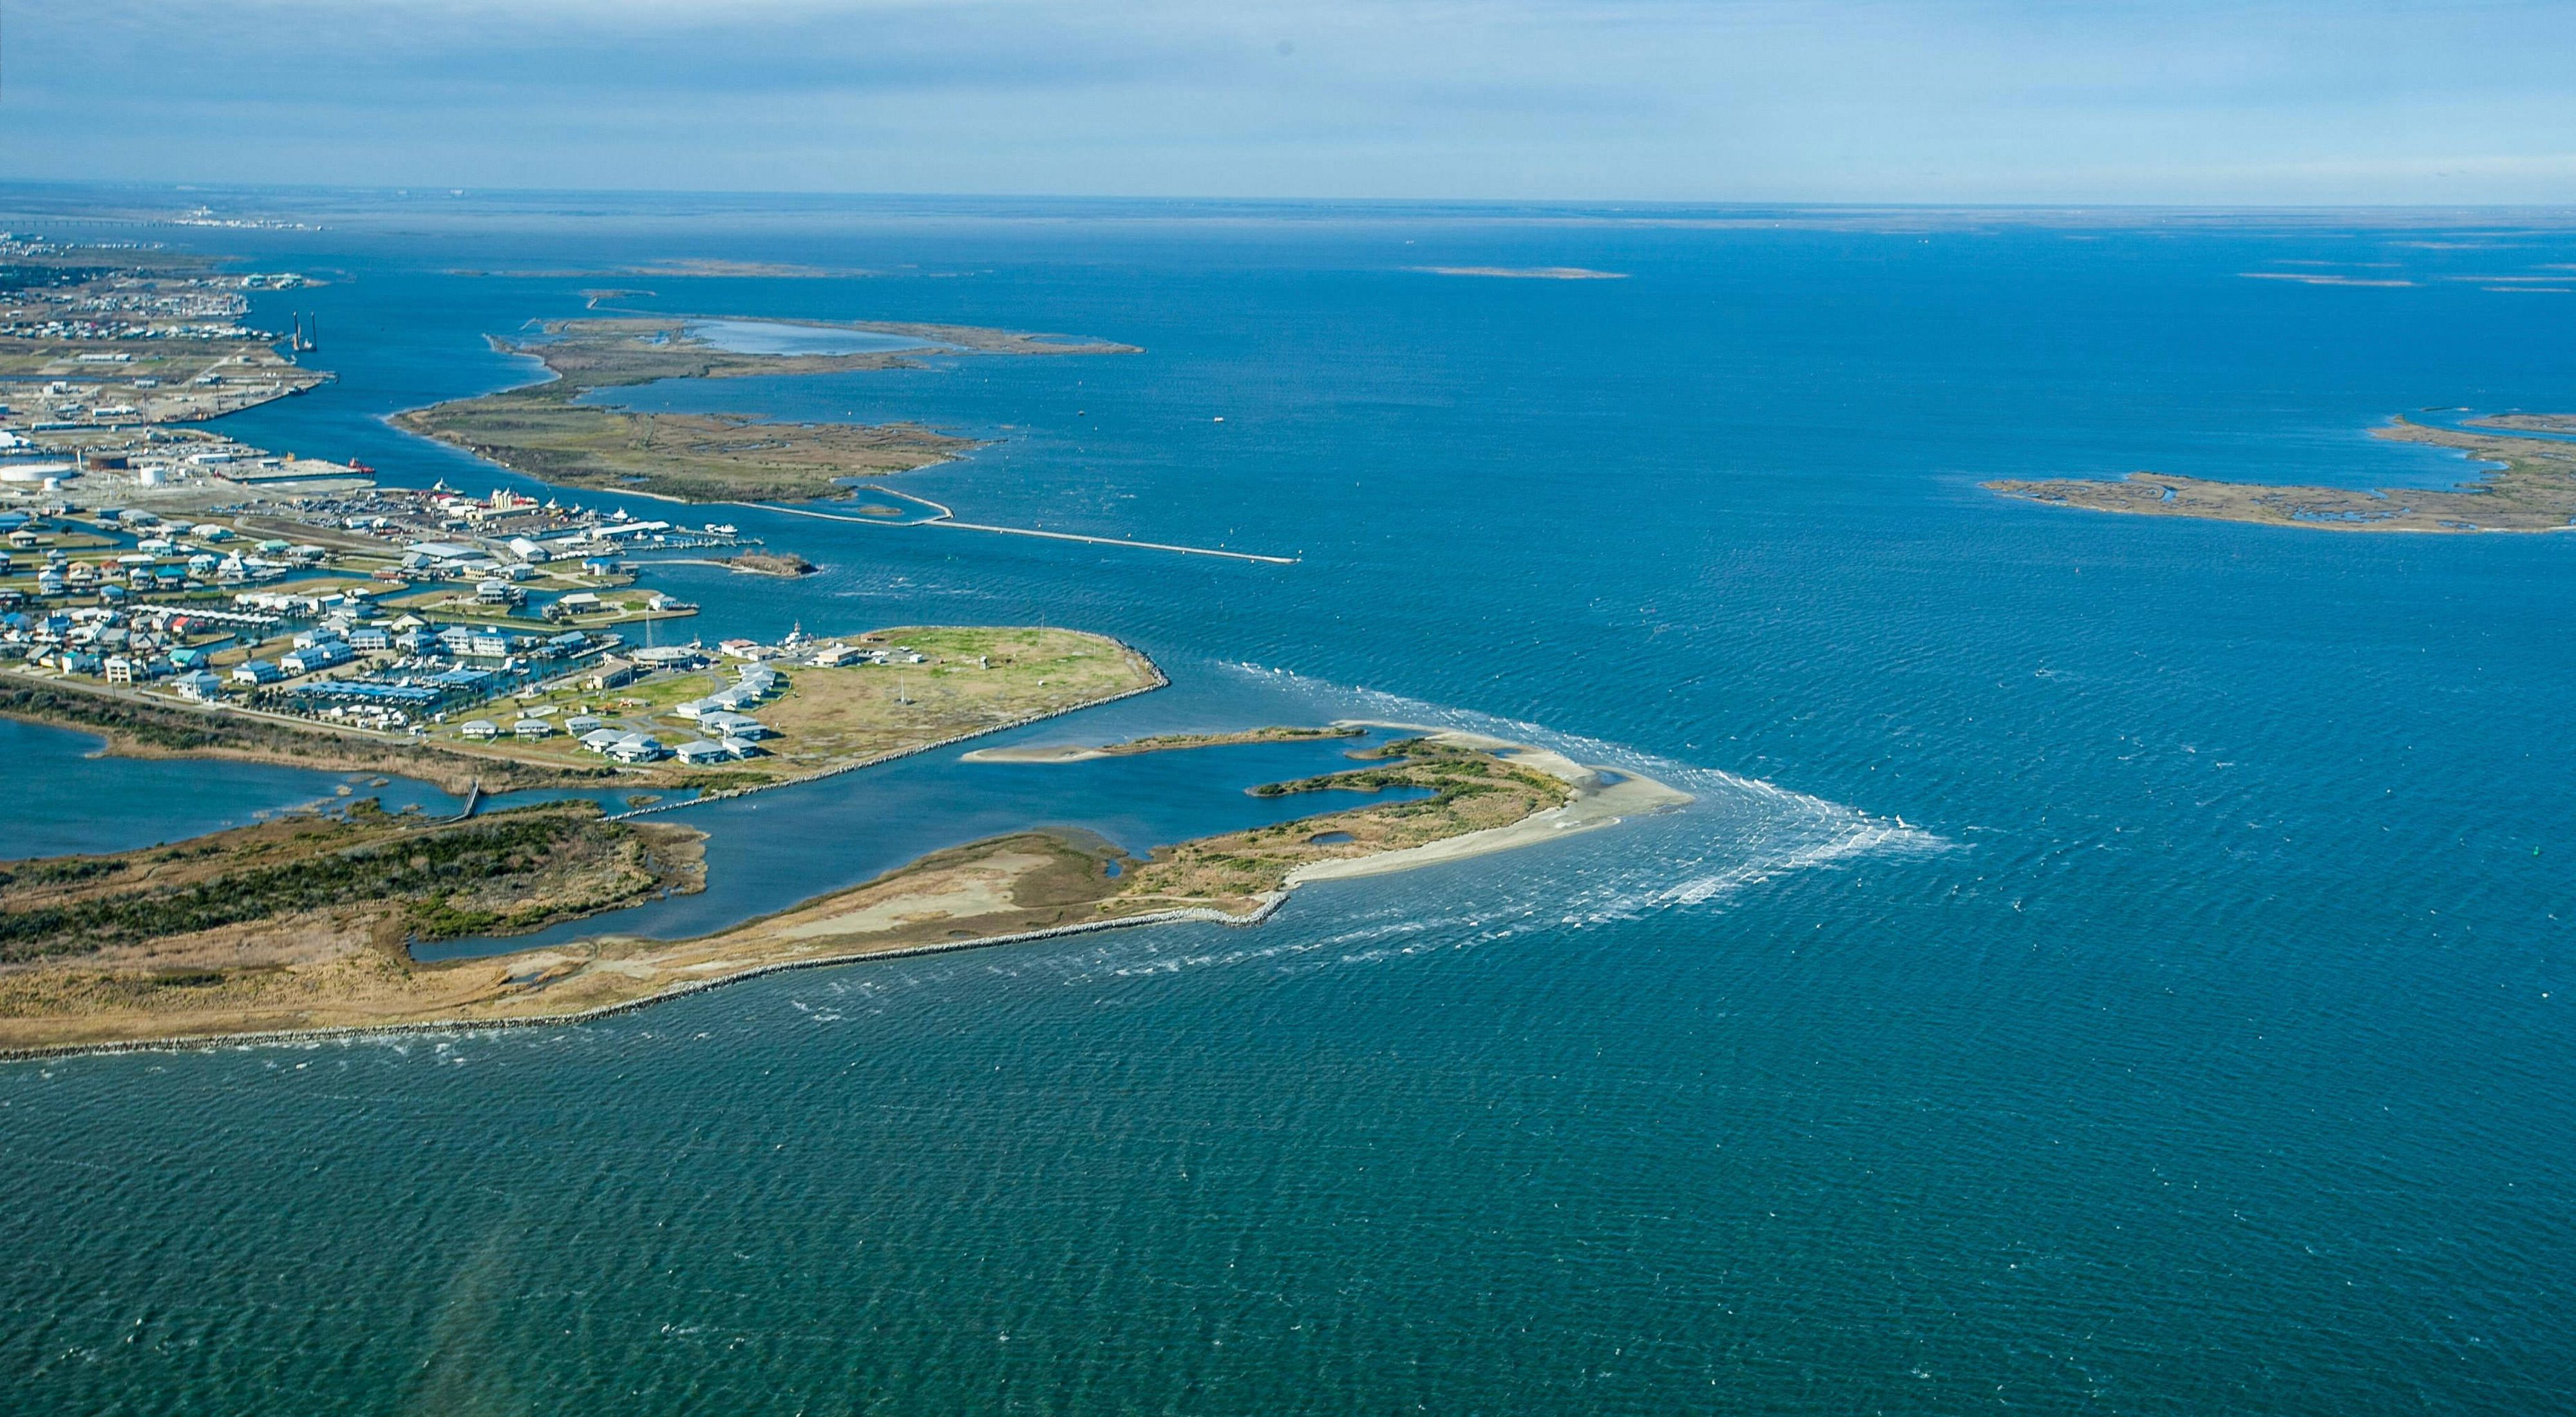 Aerial view of the ocean and towns and buildings along the coast of Grand Isle.